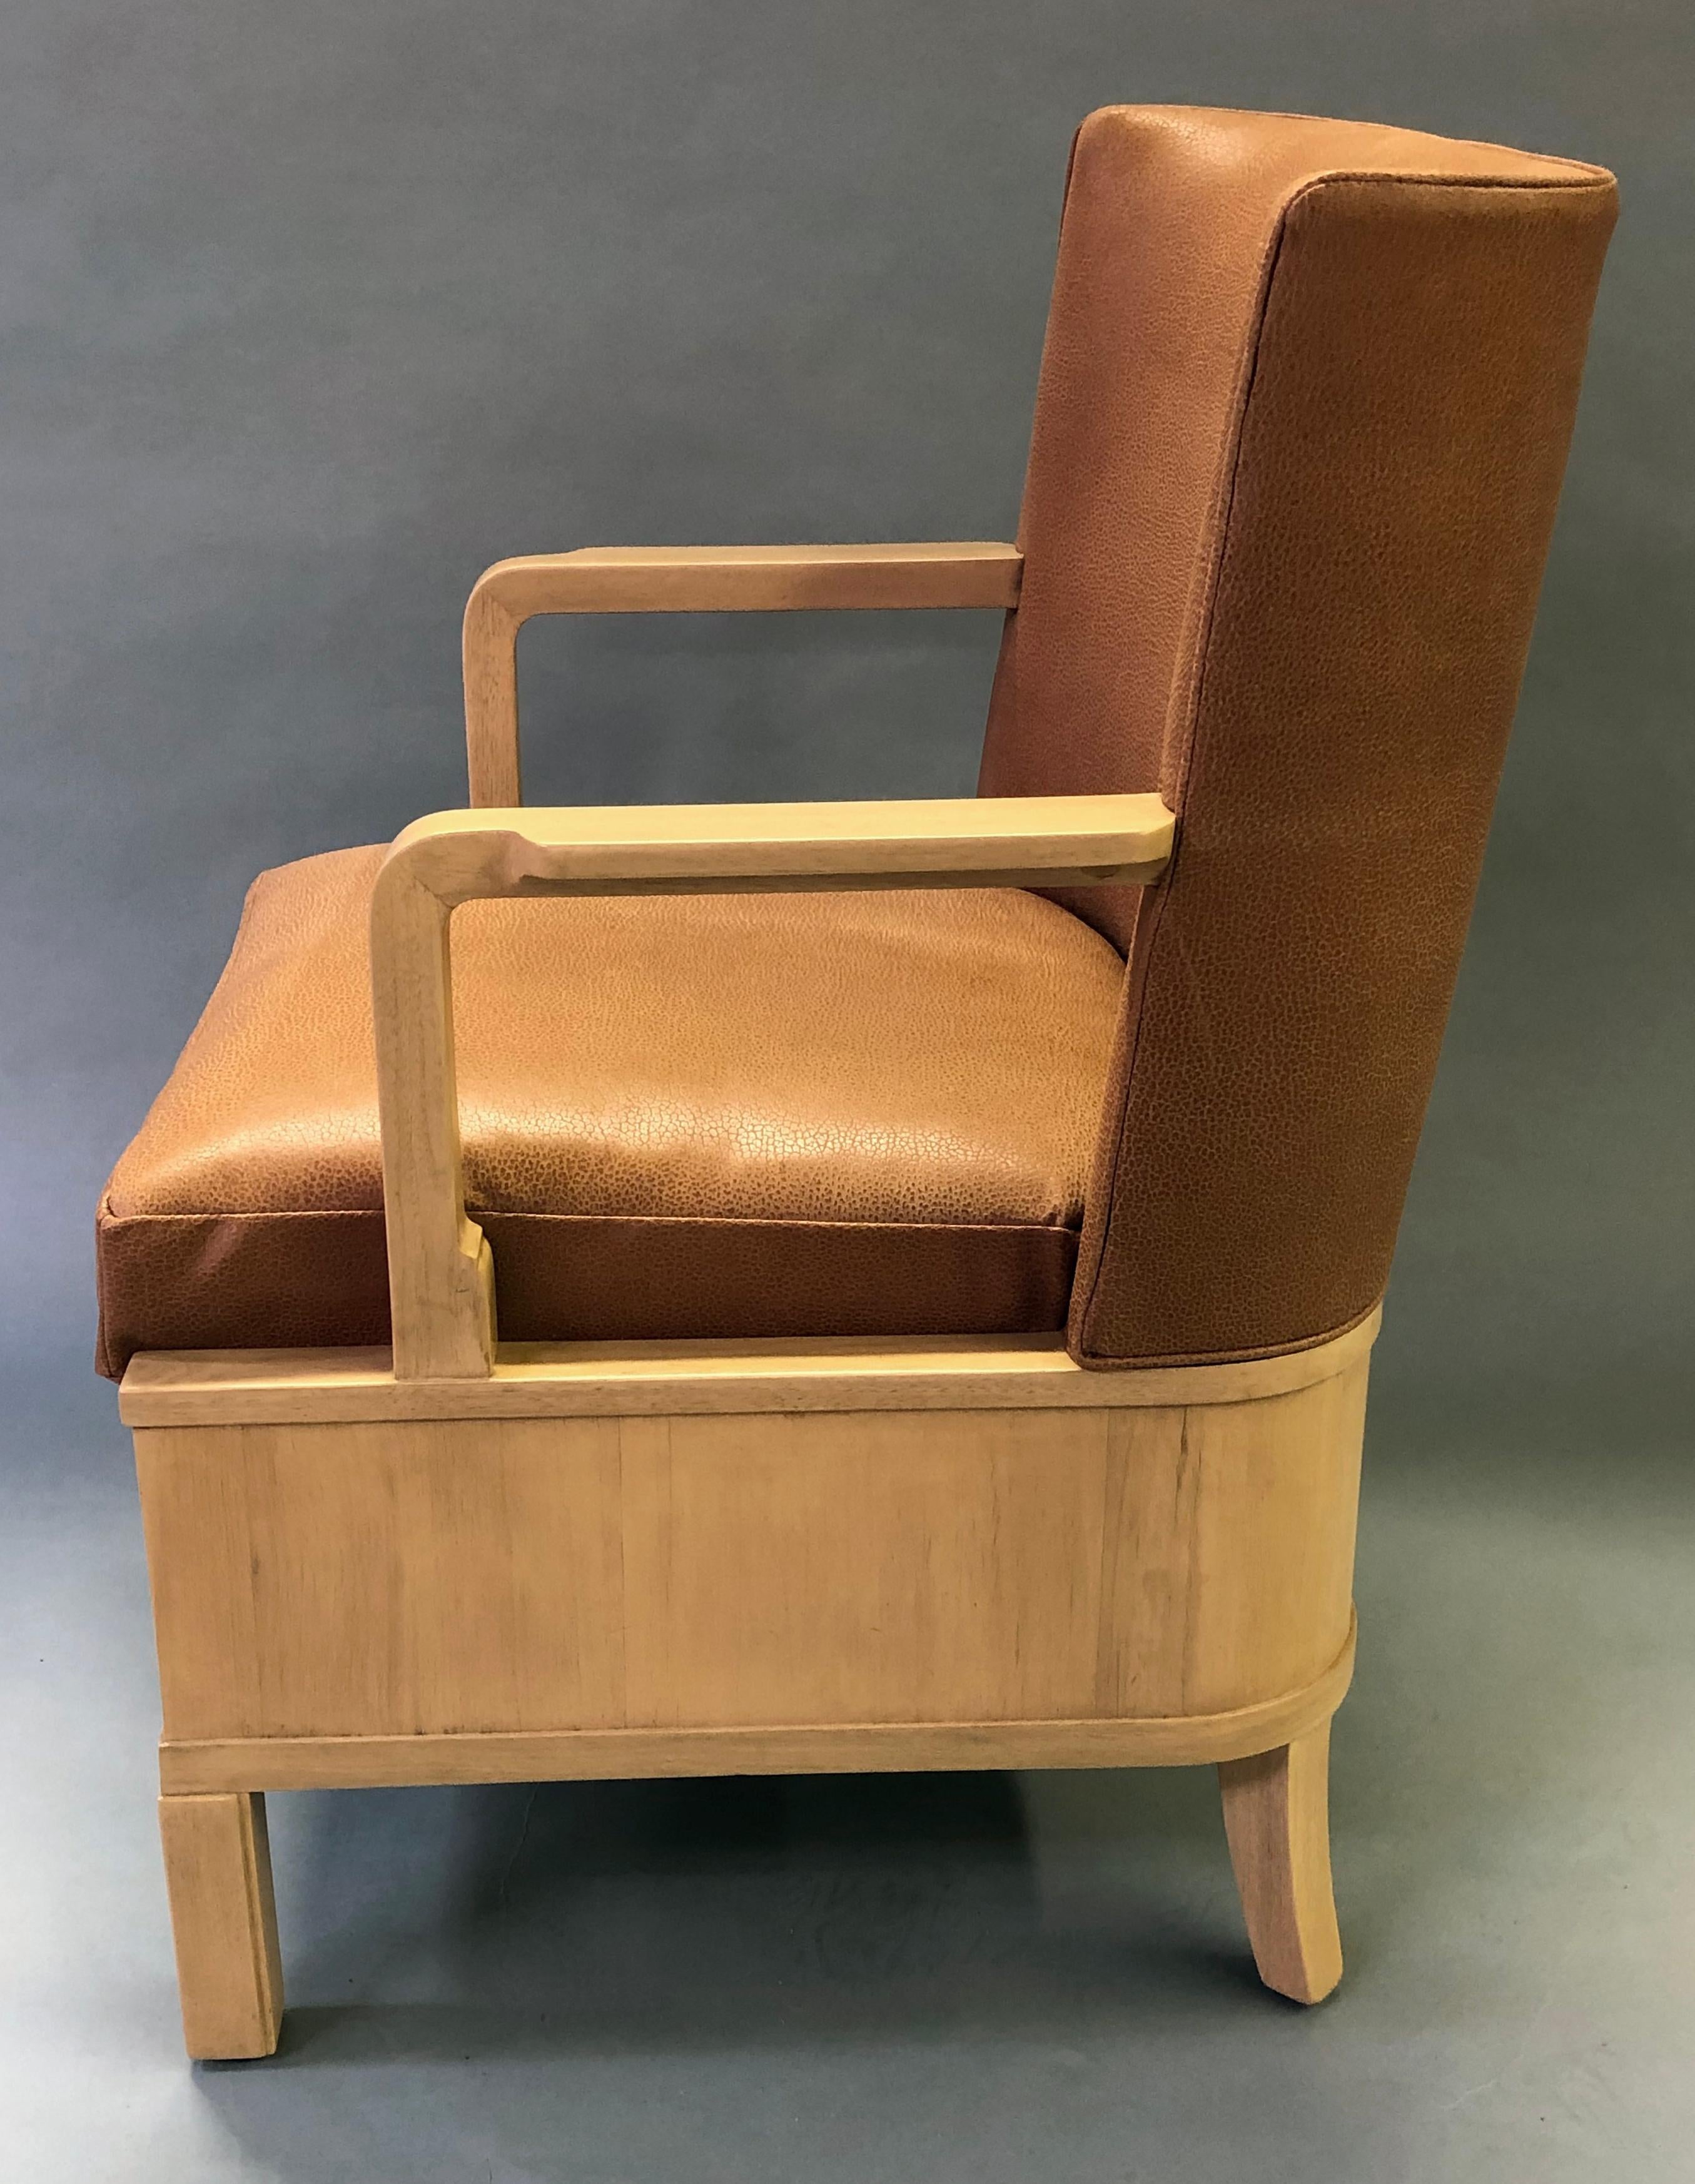 Each stylish and well designed chair with incurved upholstered back above a loose cushion seat flanked by squared arms over a u-shaped frame with inlaid marquetry.